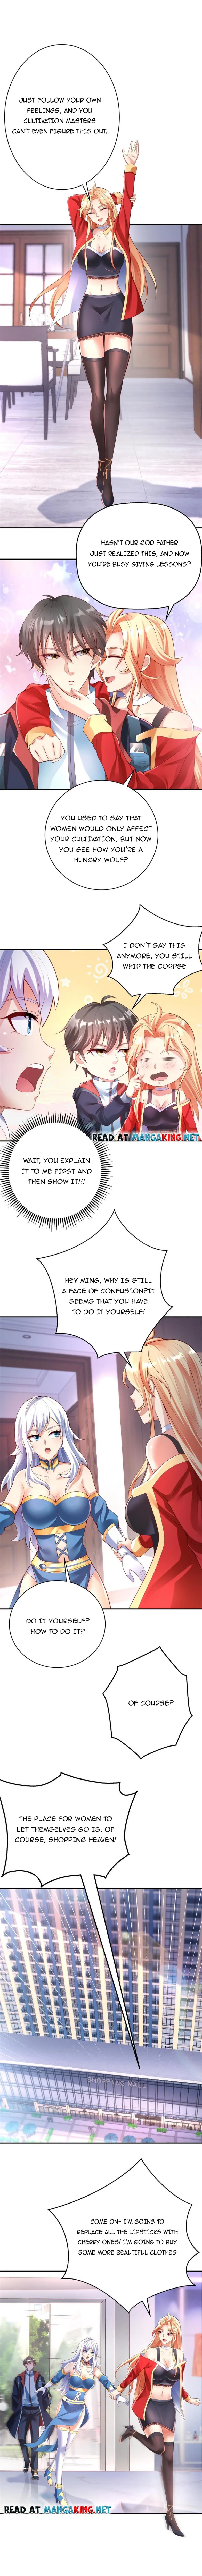 To Possess The Heavenly Body - Page 2